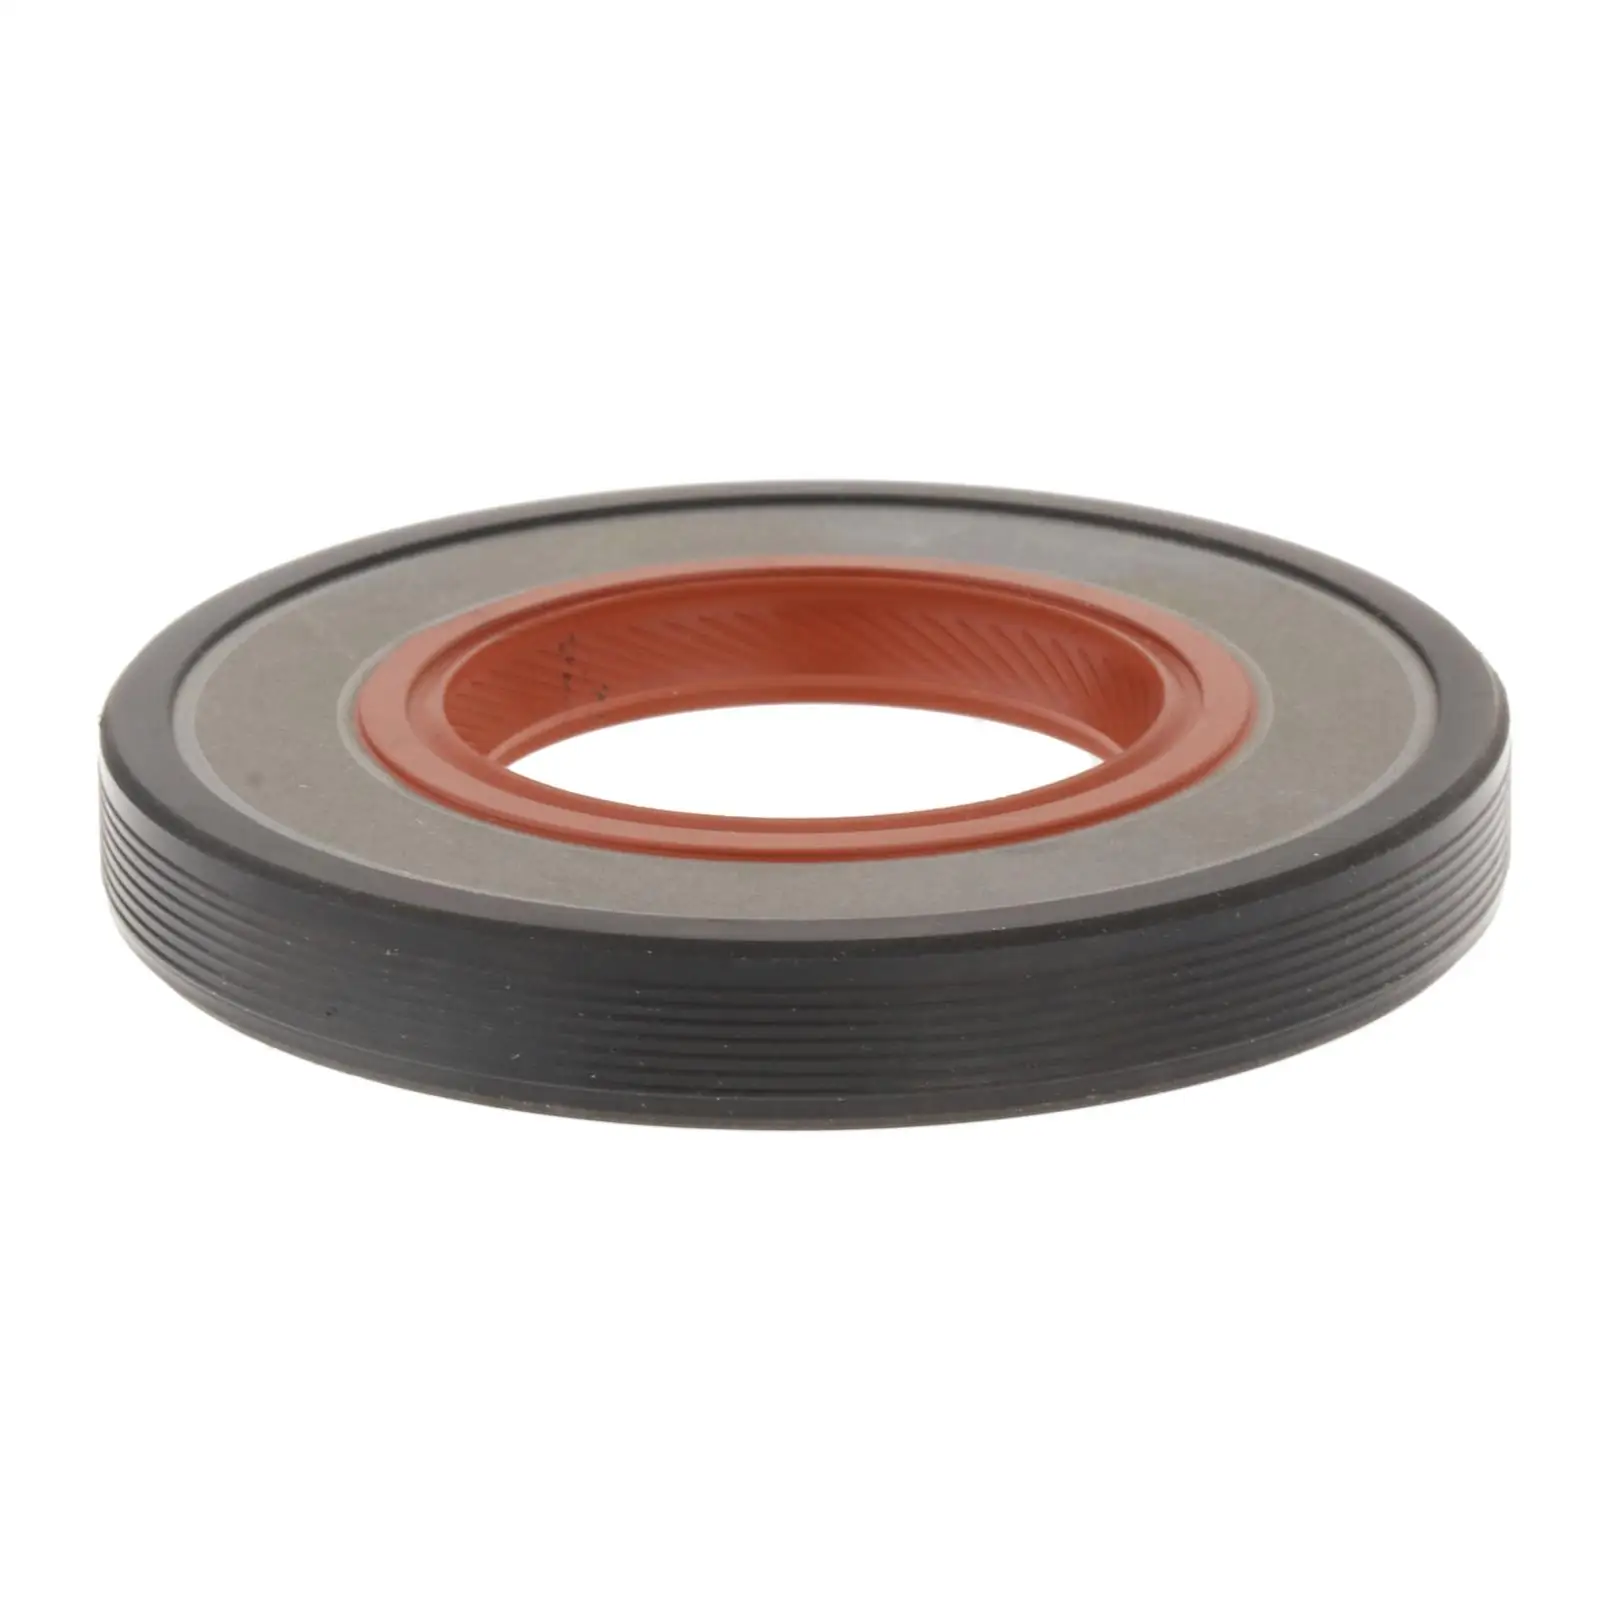 Half Shaft Oil Seal Durable Material Automatic Transmiion Fit for for